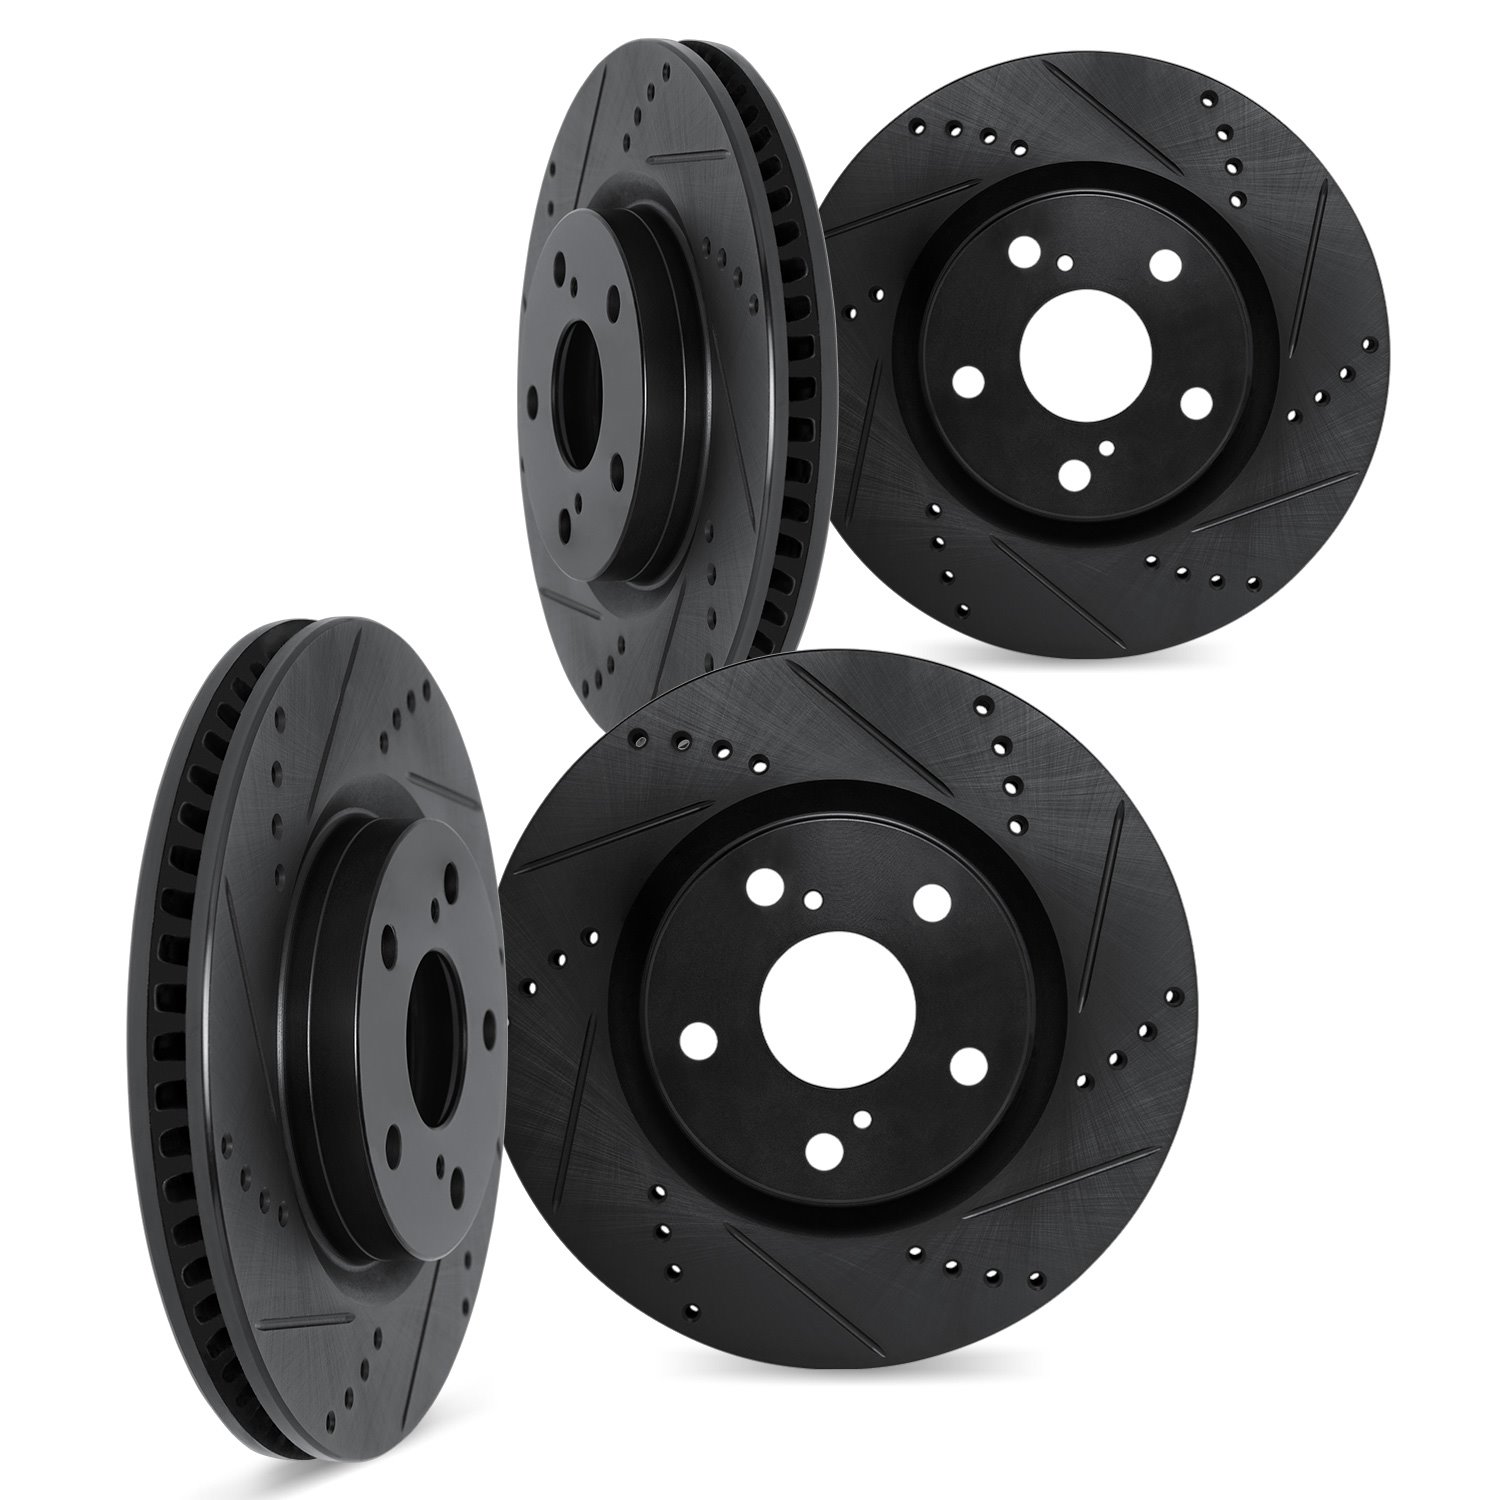 8004-11029 Drilled/Slotted Brake Rotors [Black], Fits Select Land Rover, Position: Front and Rear